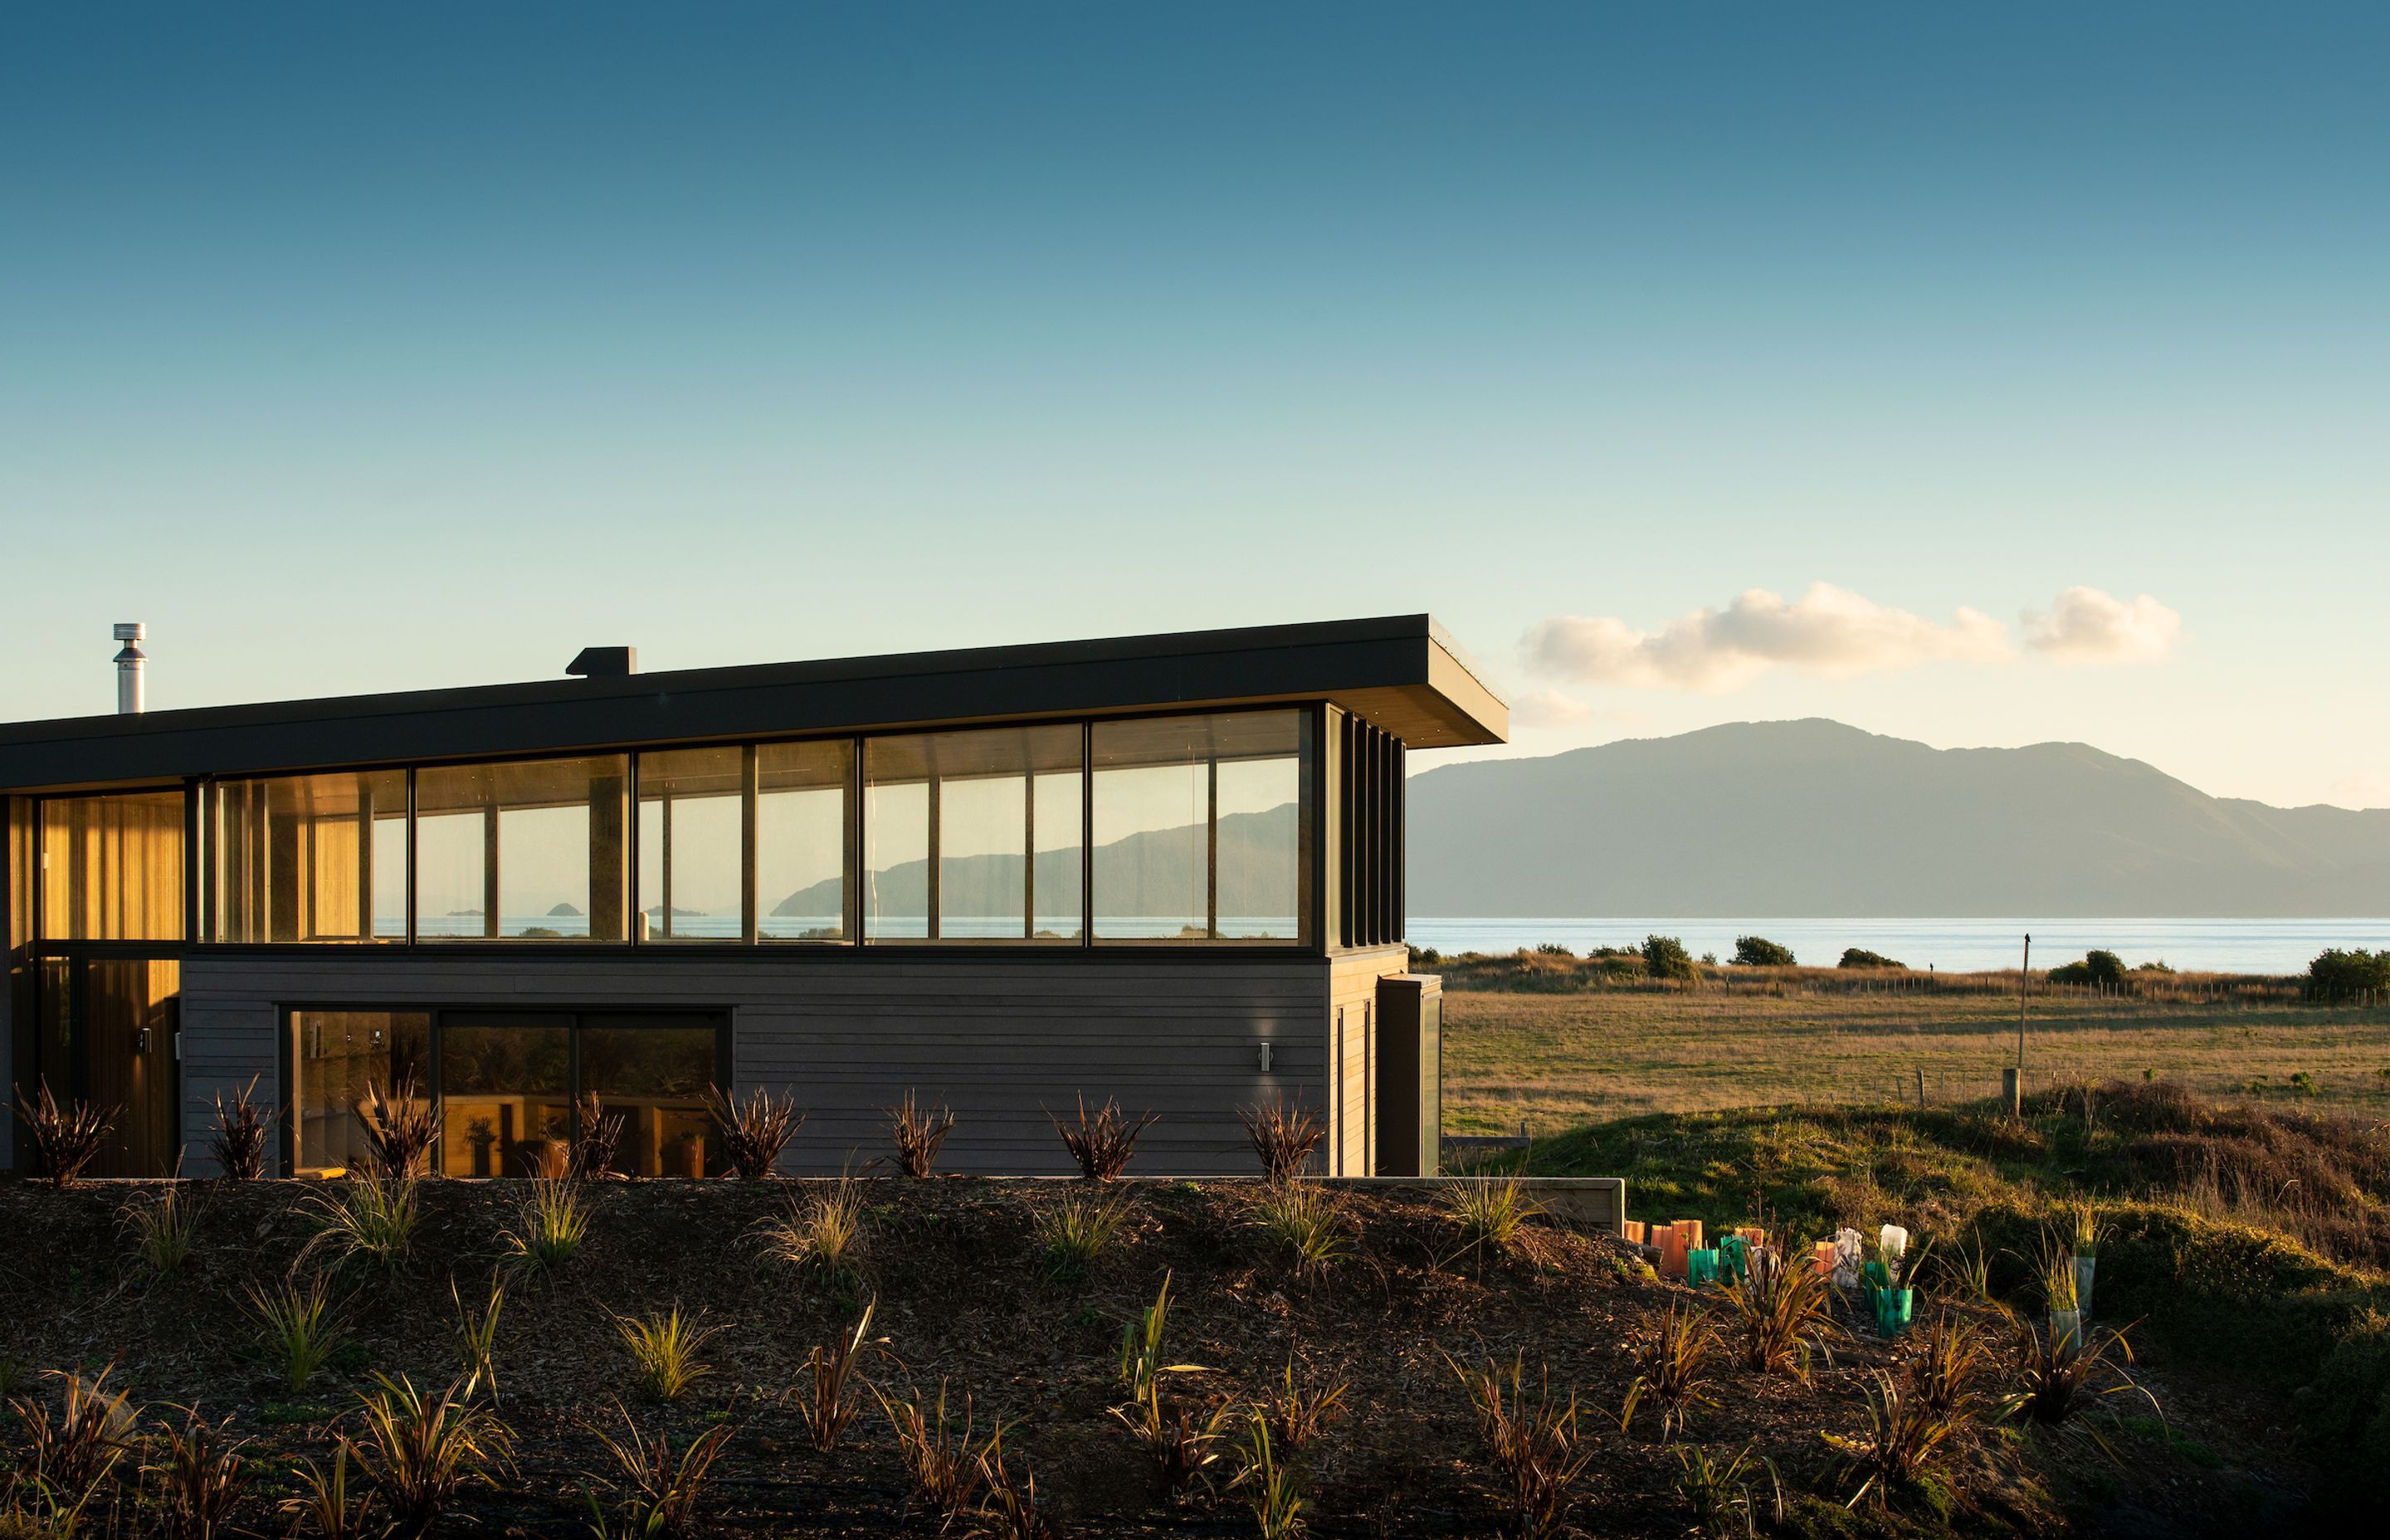 To preserve the feeling of being remote, the house was designed to be long, low and hunkered into the topography.